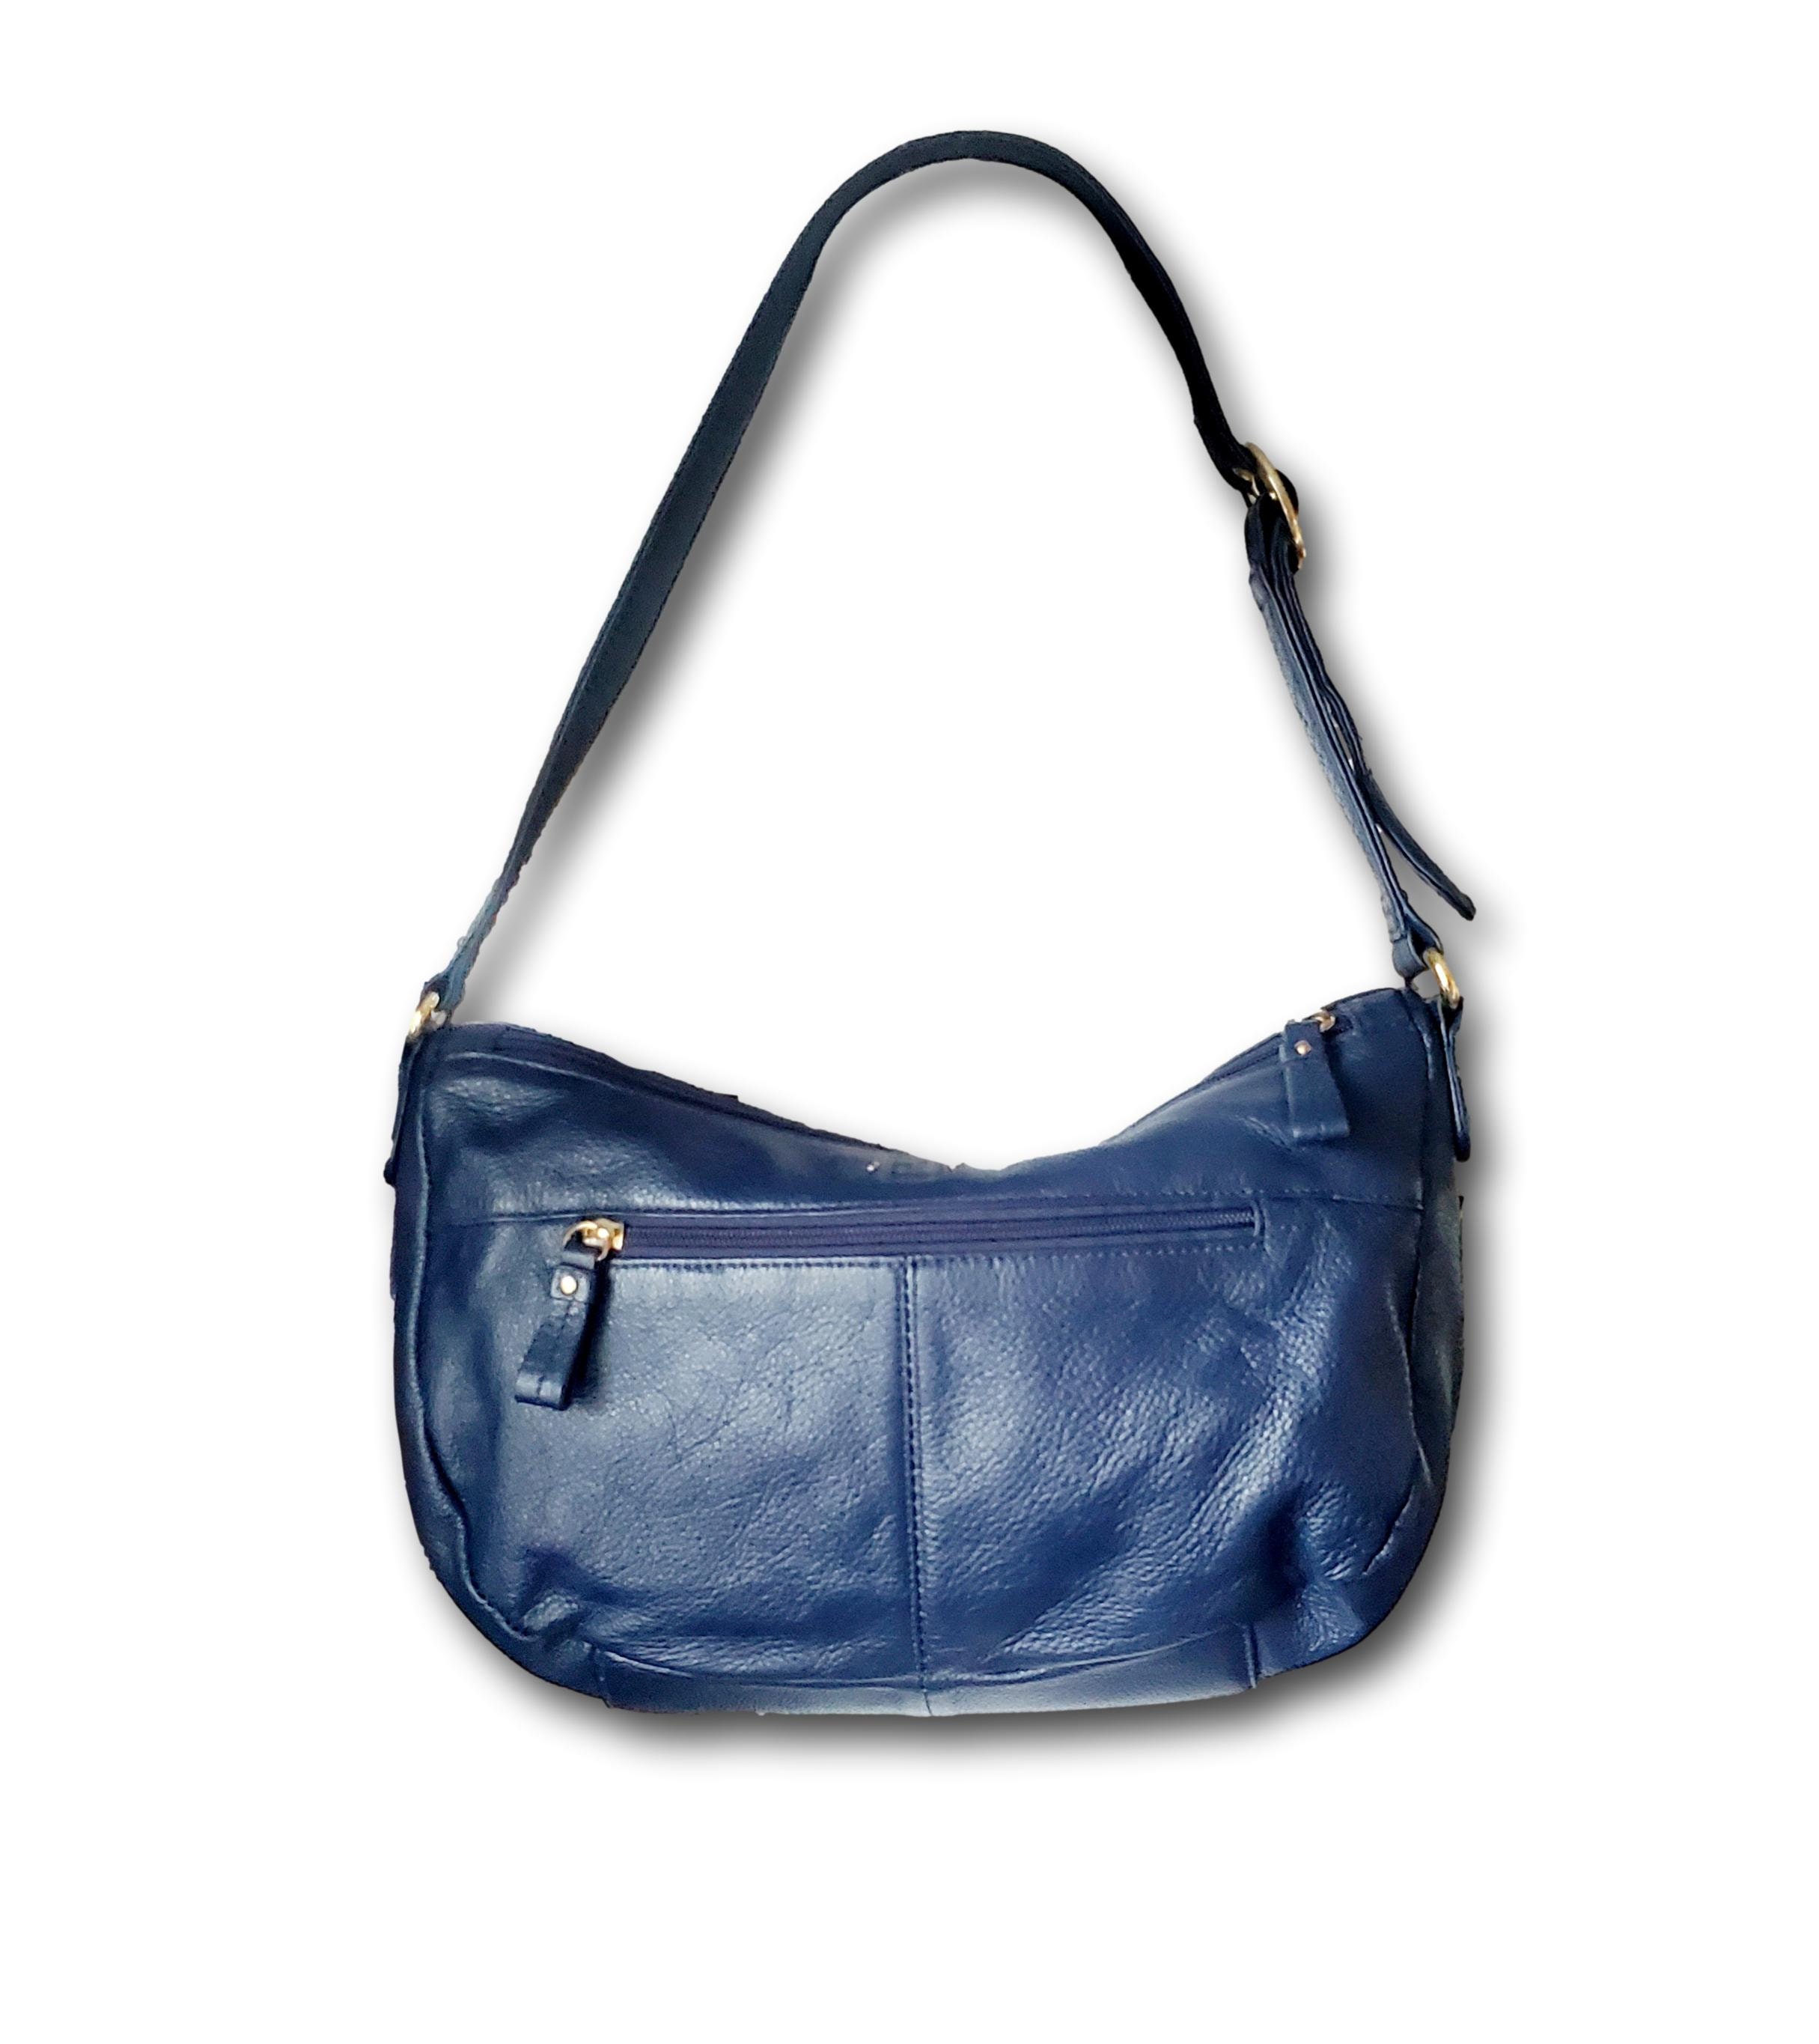 vintage stone mountain handbags products for sale